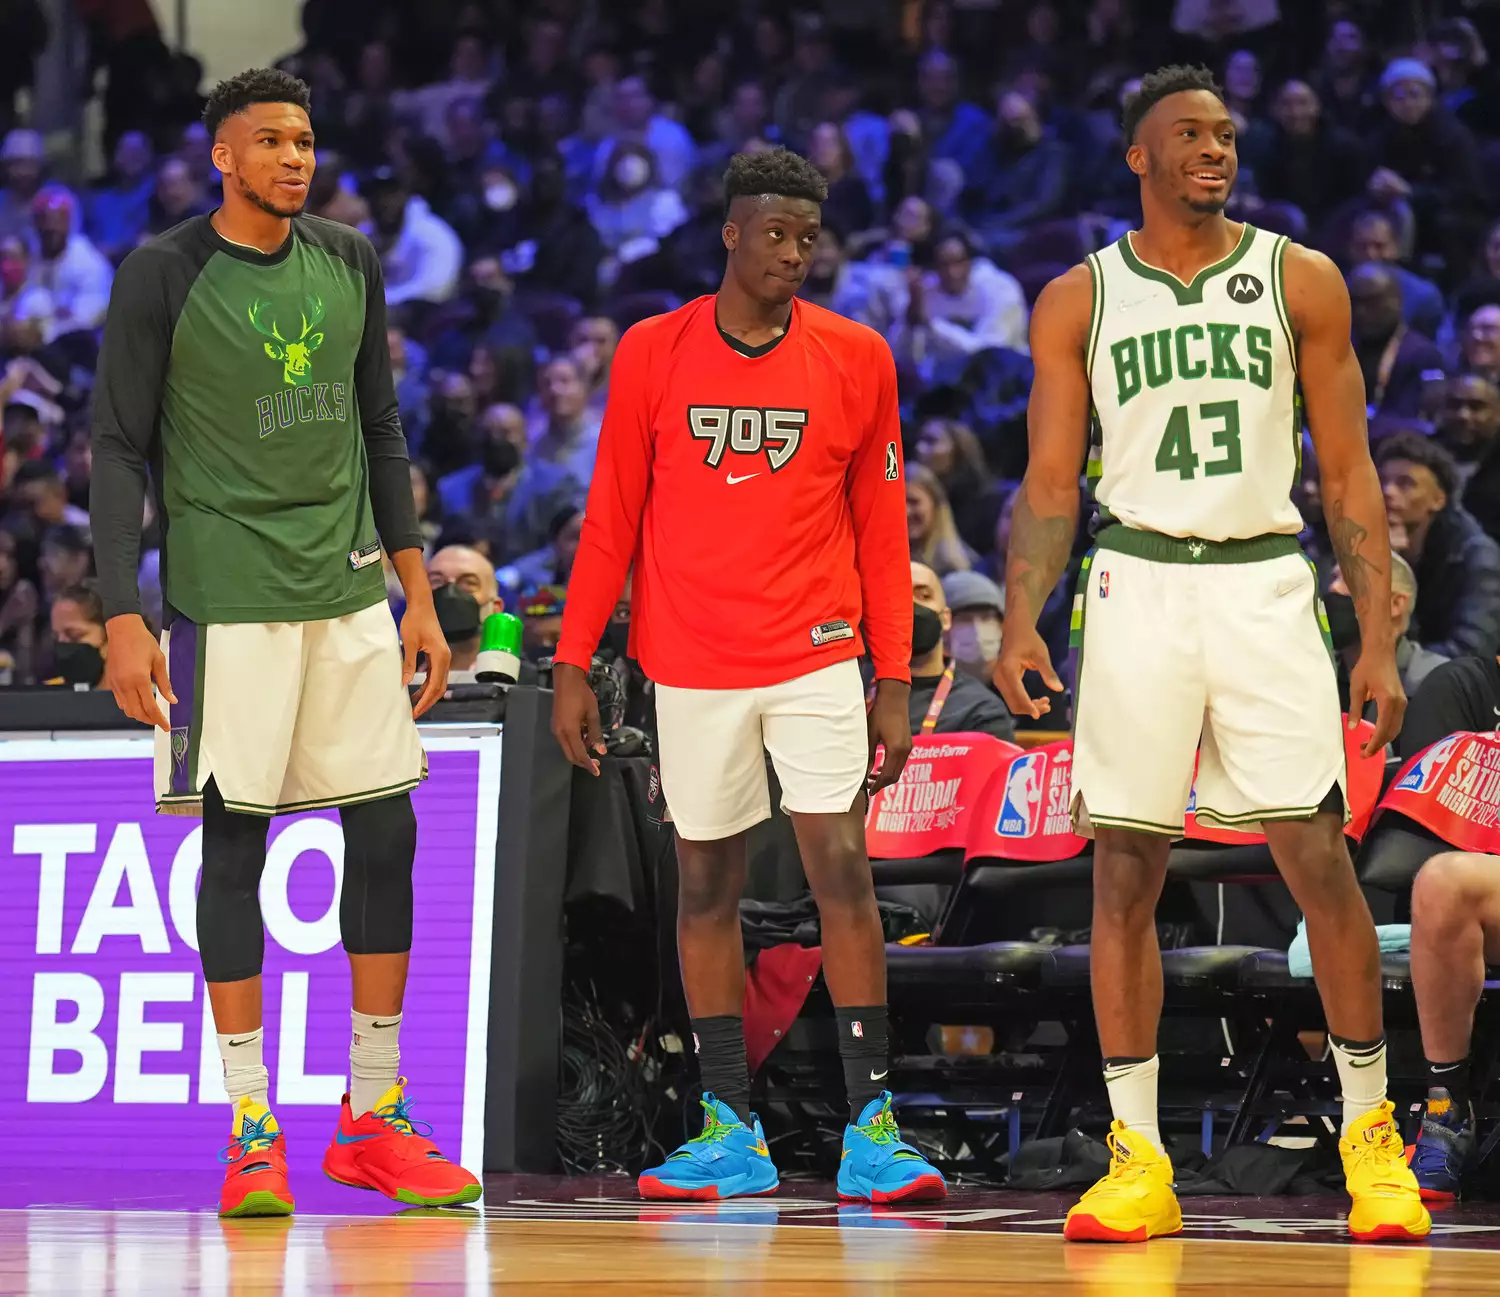 Thanasis Antetokounmpo #43, Giannis Antetokounmpo #34 of the Milwaukee Bucks and Alexc Antetokounmpo of Raptors 905 look on during the Taco Bell Skills Challenge as part of 2022 NBA All Star Weekend on February 19, 2022 at Rocket Mortgage FieldHouse in Cleveland, Ohio.